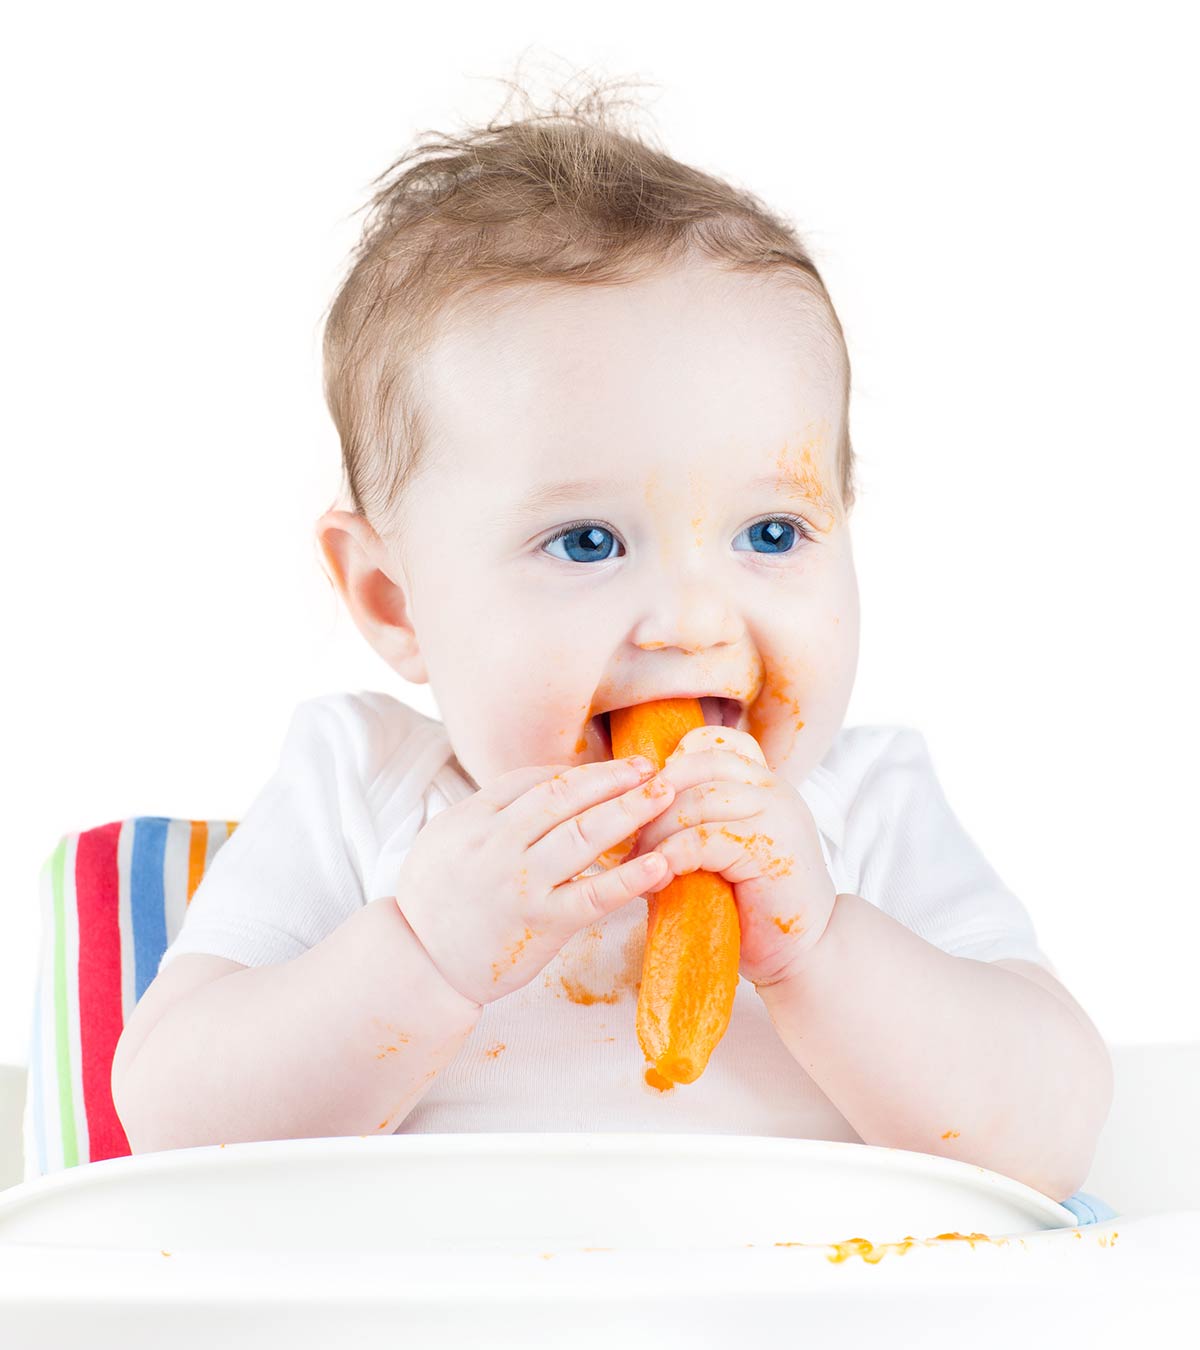 Zucchini For Baby: Safety, Nutrition Value, Benefits And Recipes